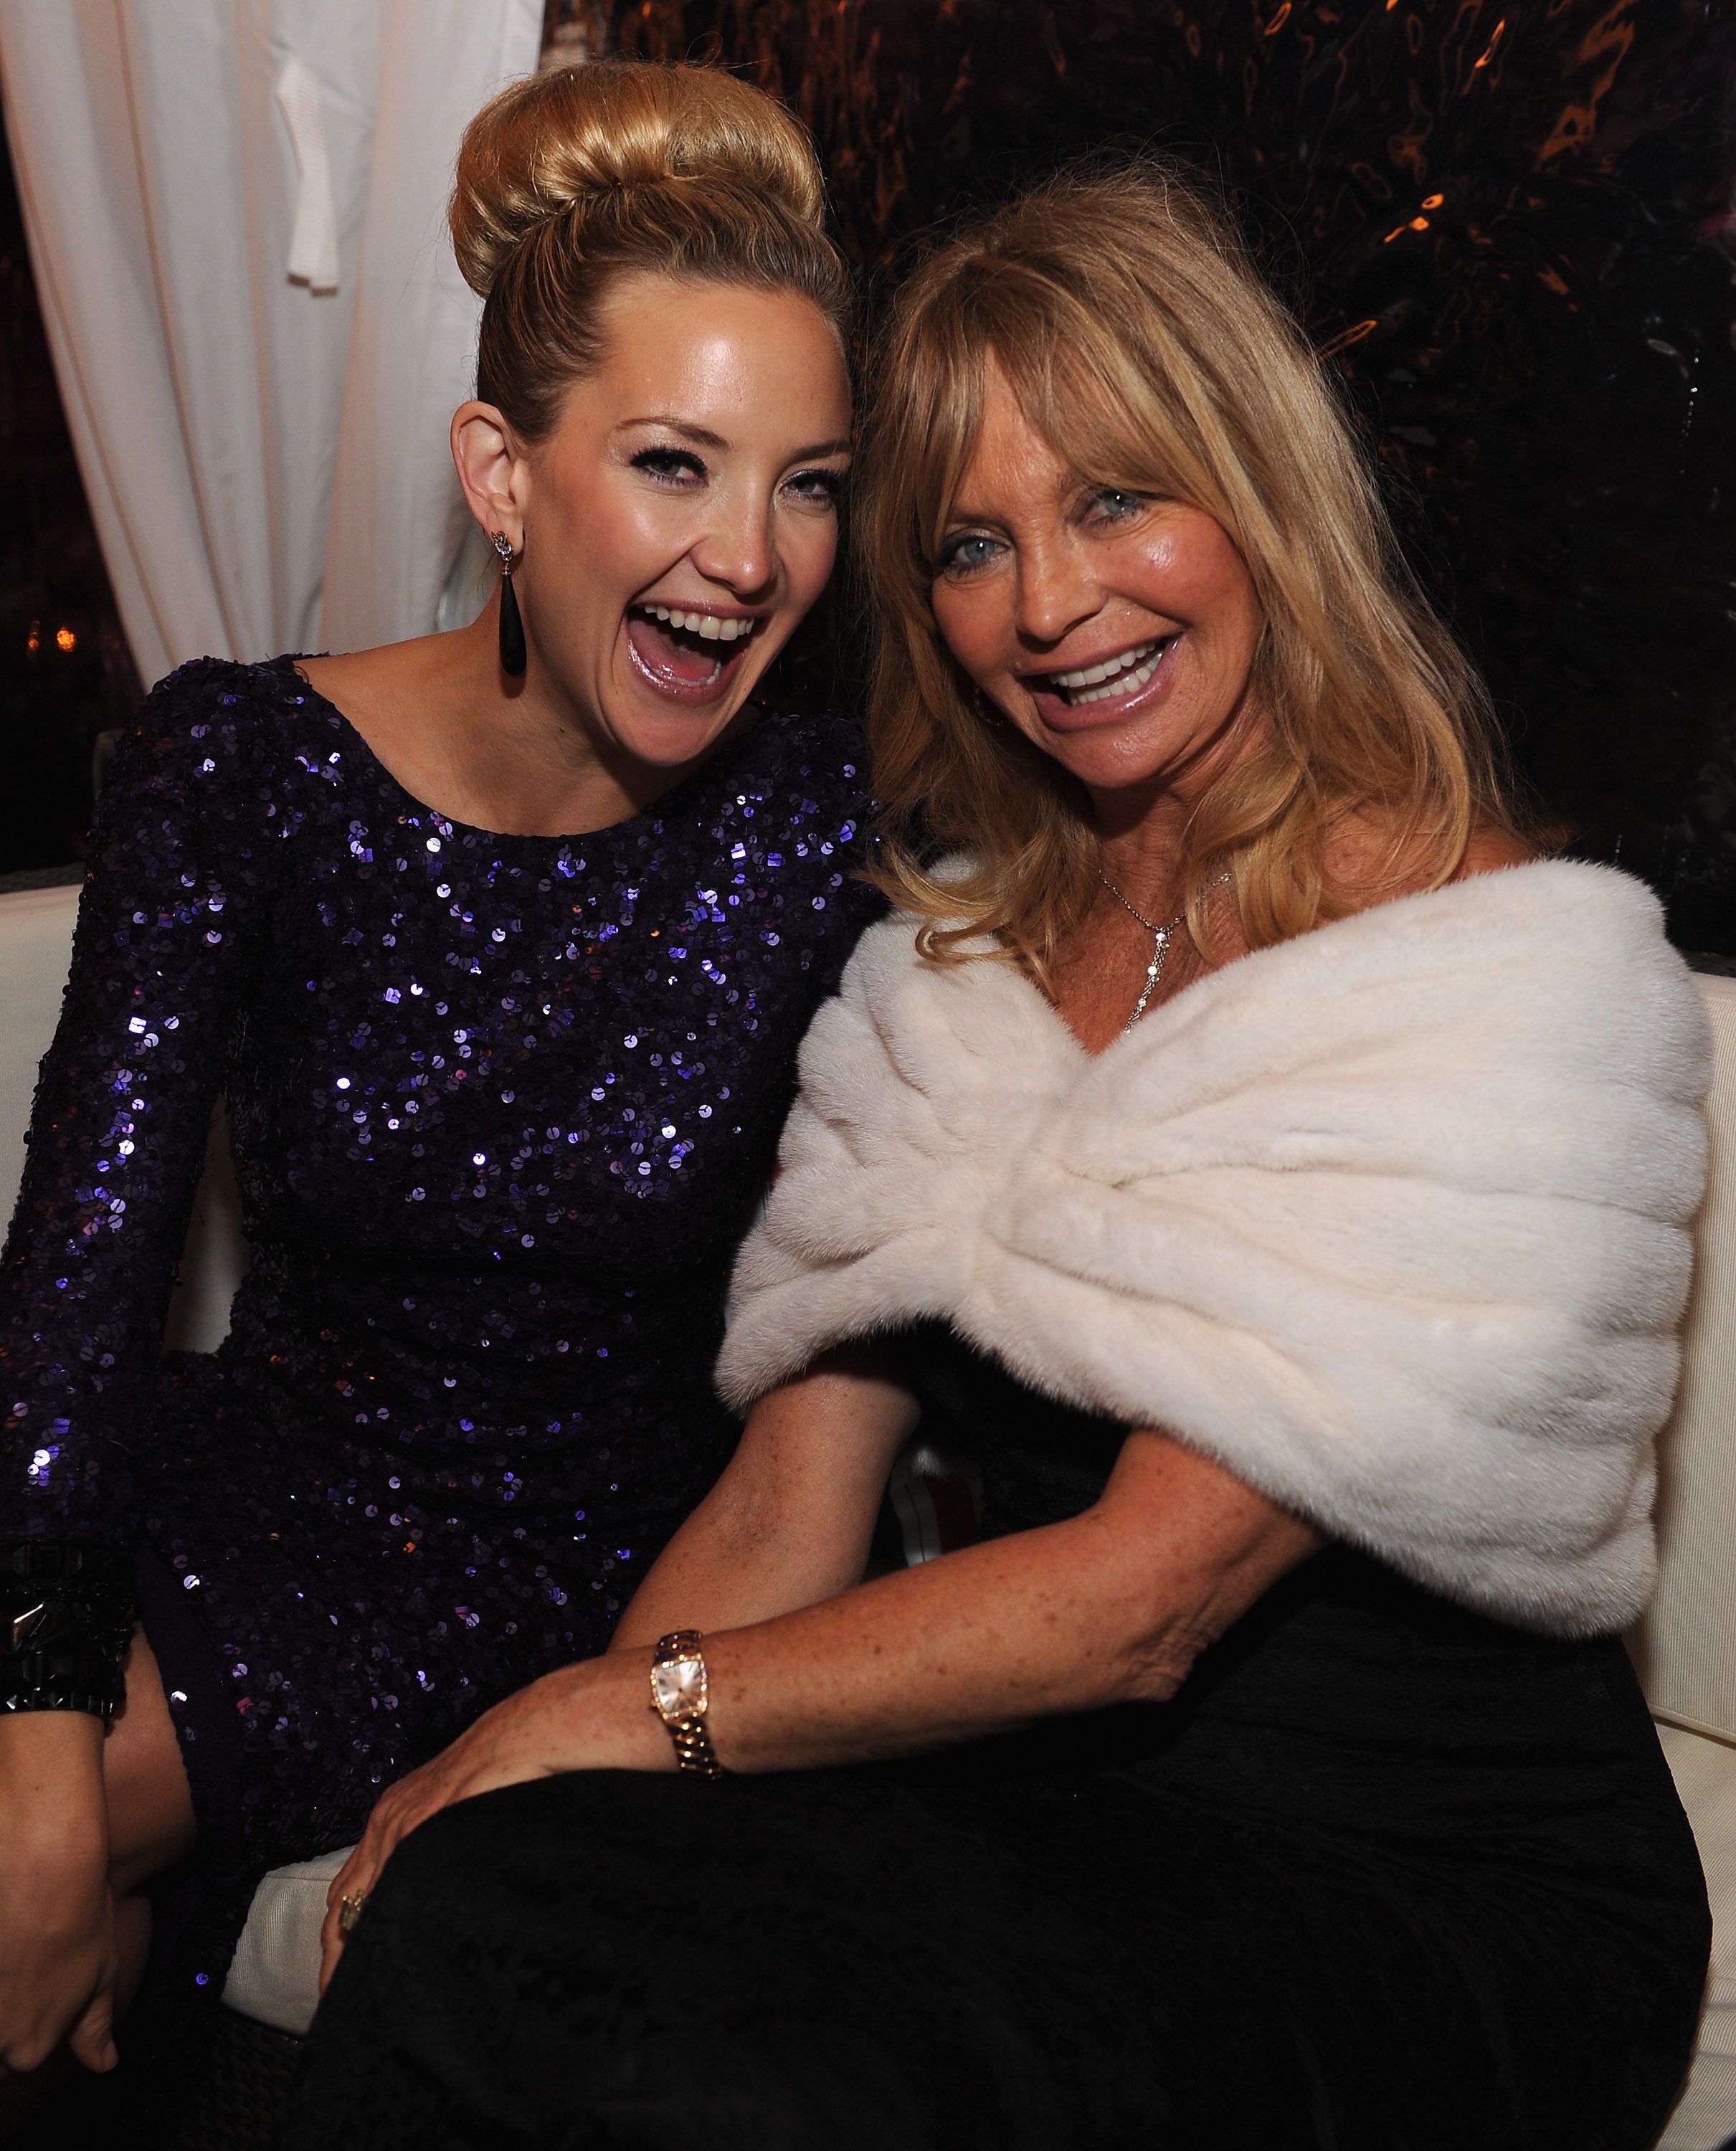 Kate Hudson and Goldie Hawn attend the Bloomberg & Vanity Fair cocktail reception following the 2012 White House Correspondents' Association Dinner at the residence of the French Ambassador on April 28, 2012 | Source: Getty Images